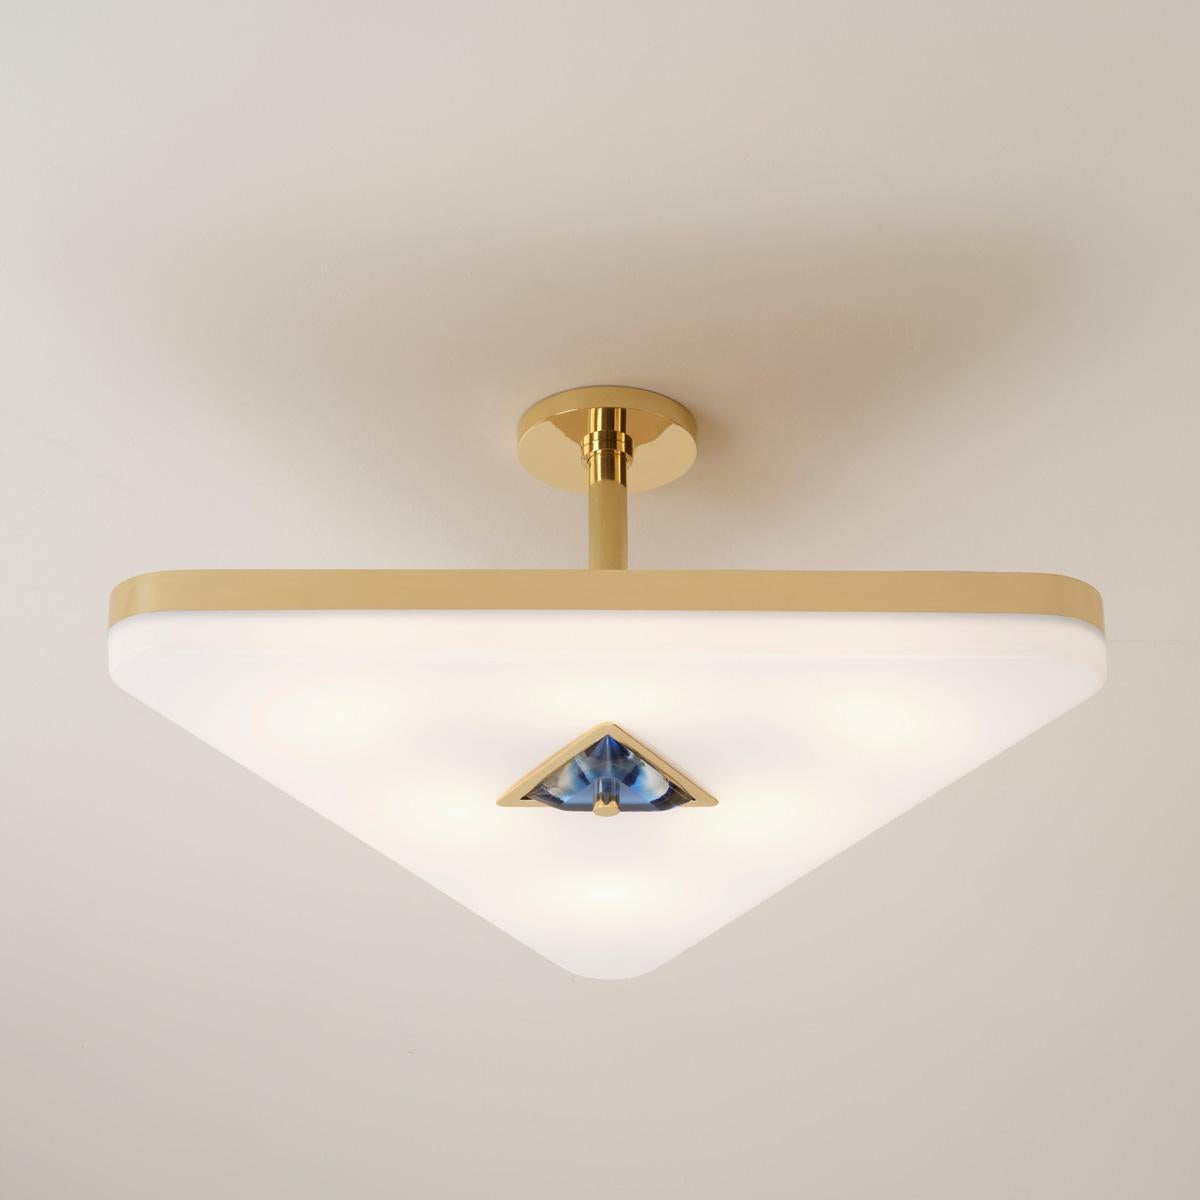 Brass Iris Triangle Ceiling Light by Gaspare Asaro. Polished Nickel Finish For Sale